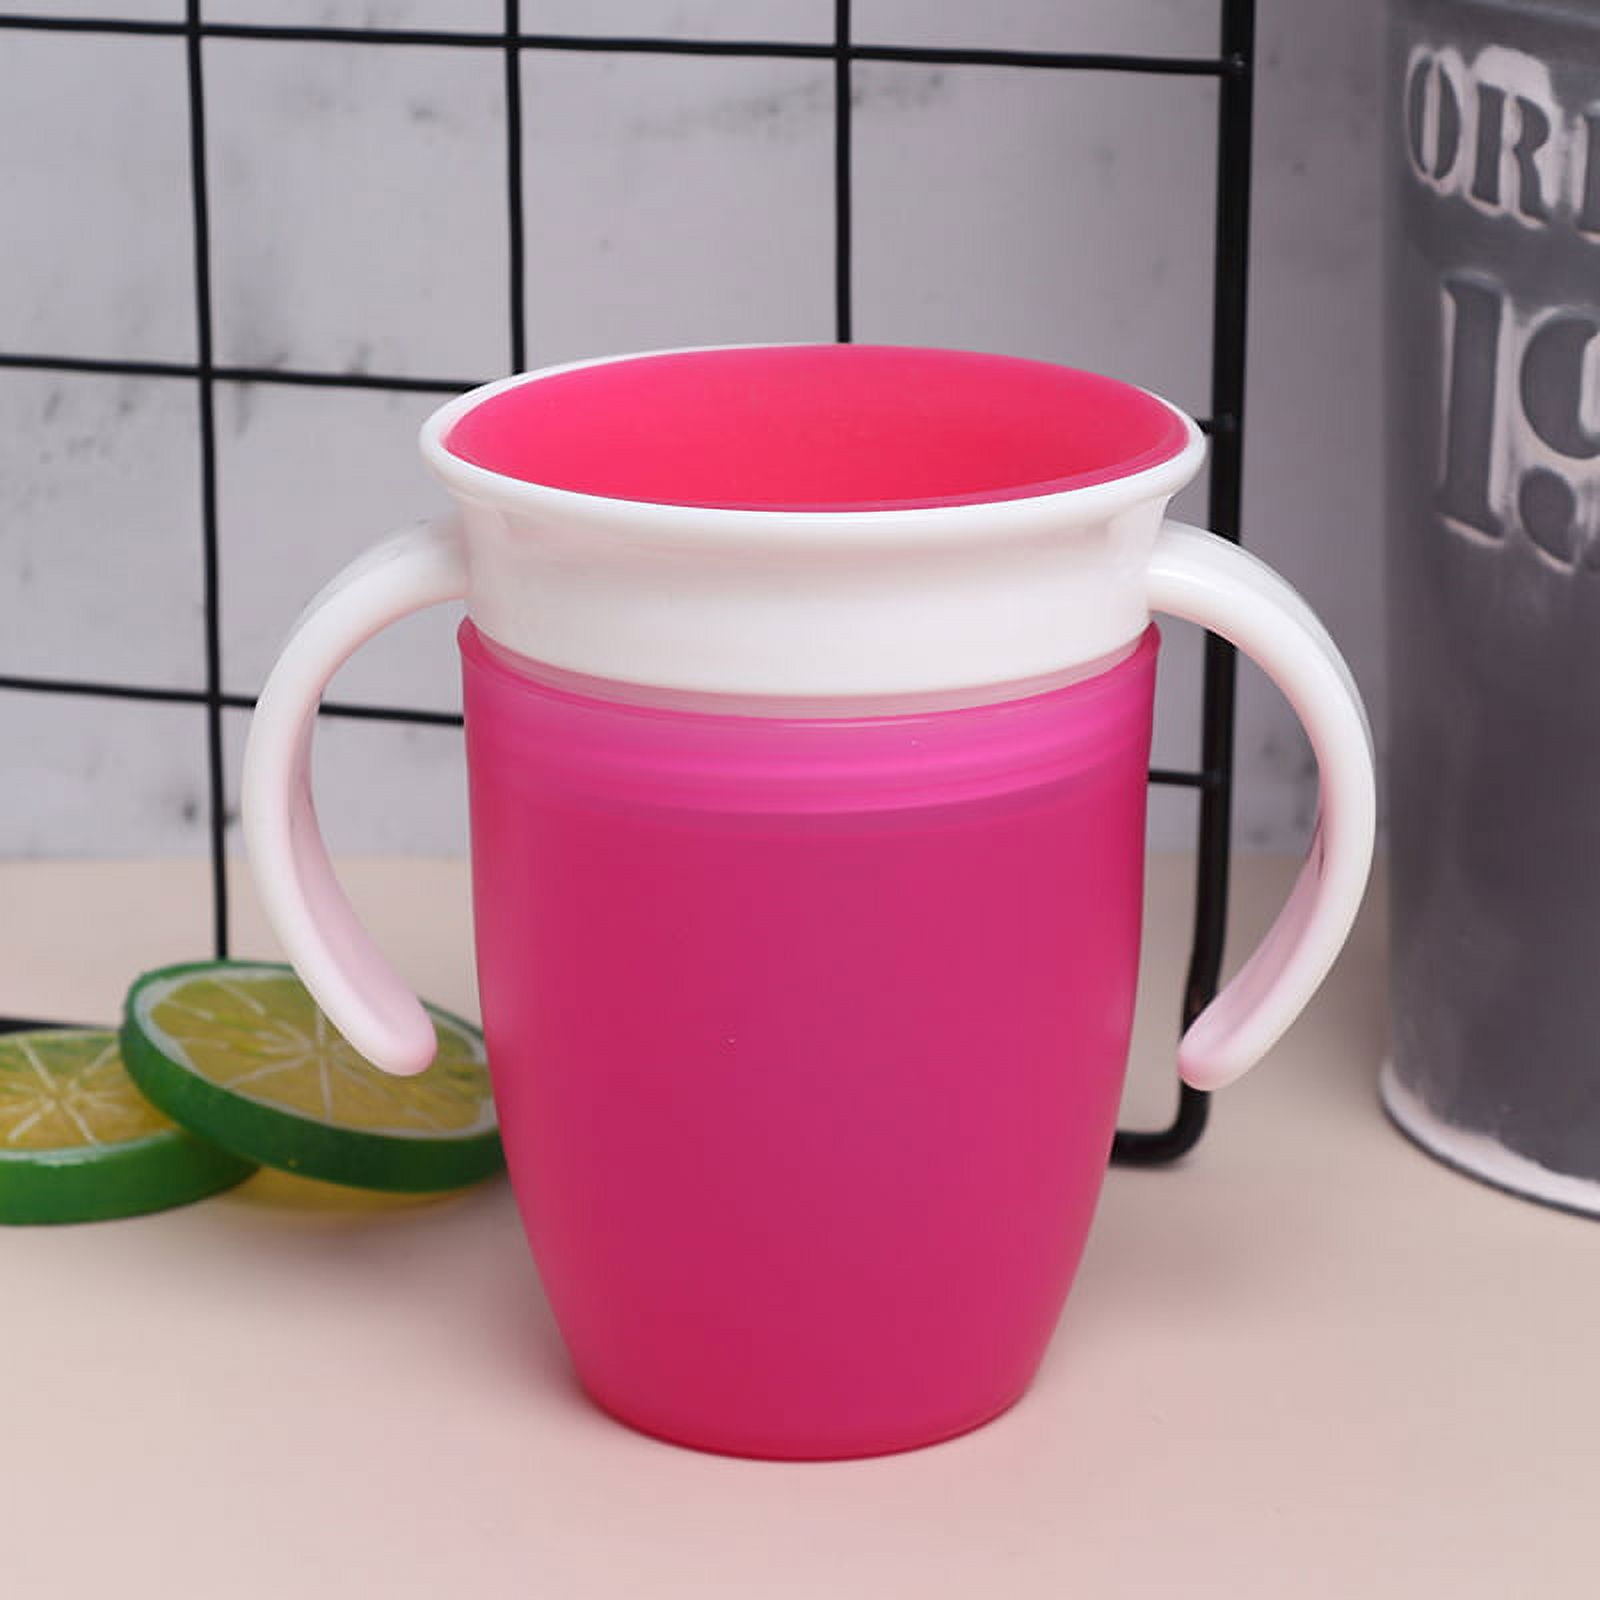 1PC 360 Degree Can Be Rotated Magic Cup Baby Learning Drinking Cup